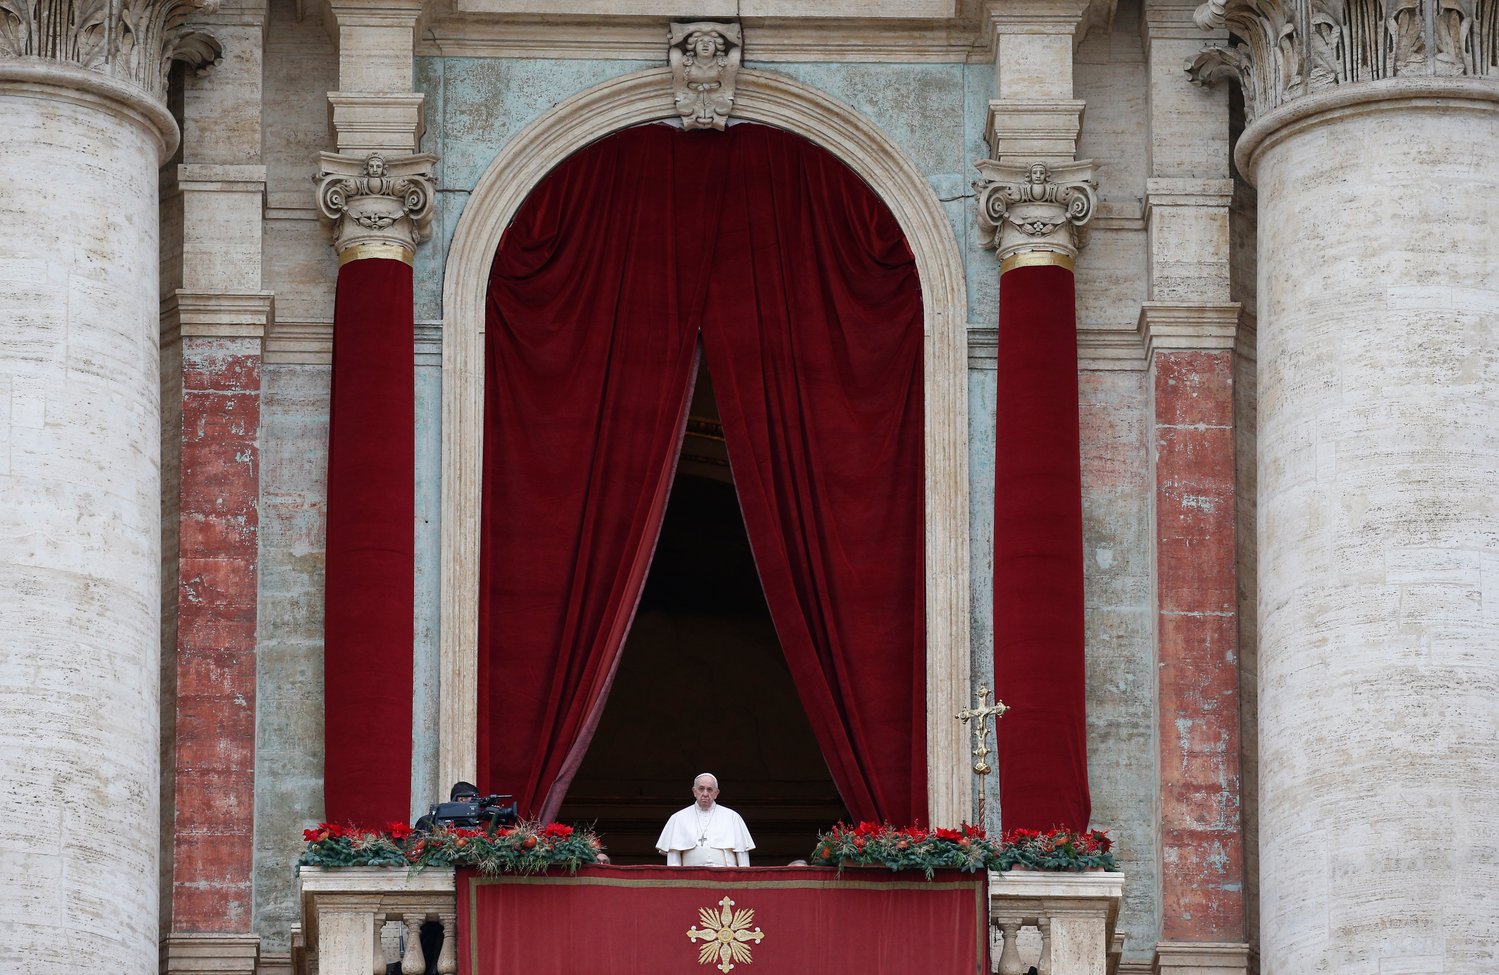 Pope Francis leads his Christmas message and blessing “urbi et orbi” (to the city and the world) from the central balcony of St. Peter’s Basilica at the Vatican Dec. 25.